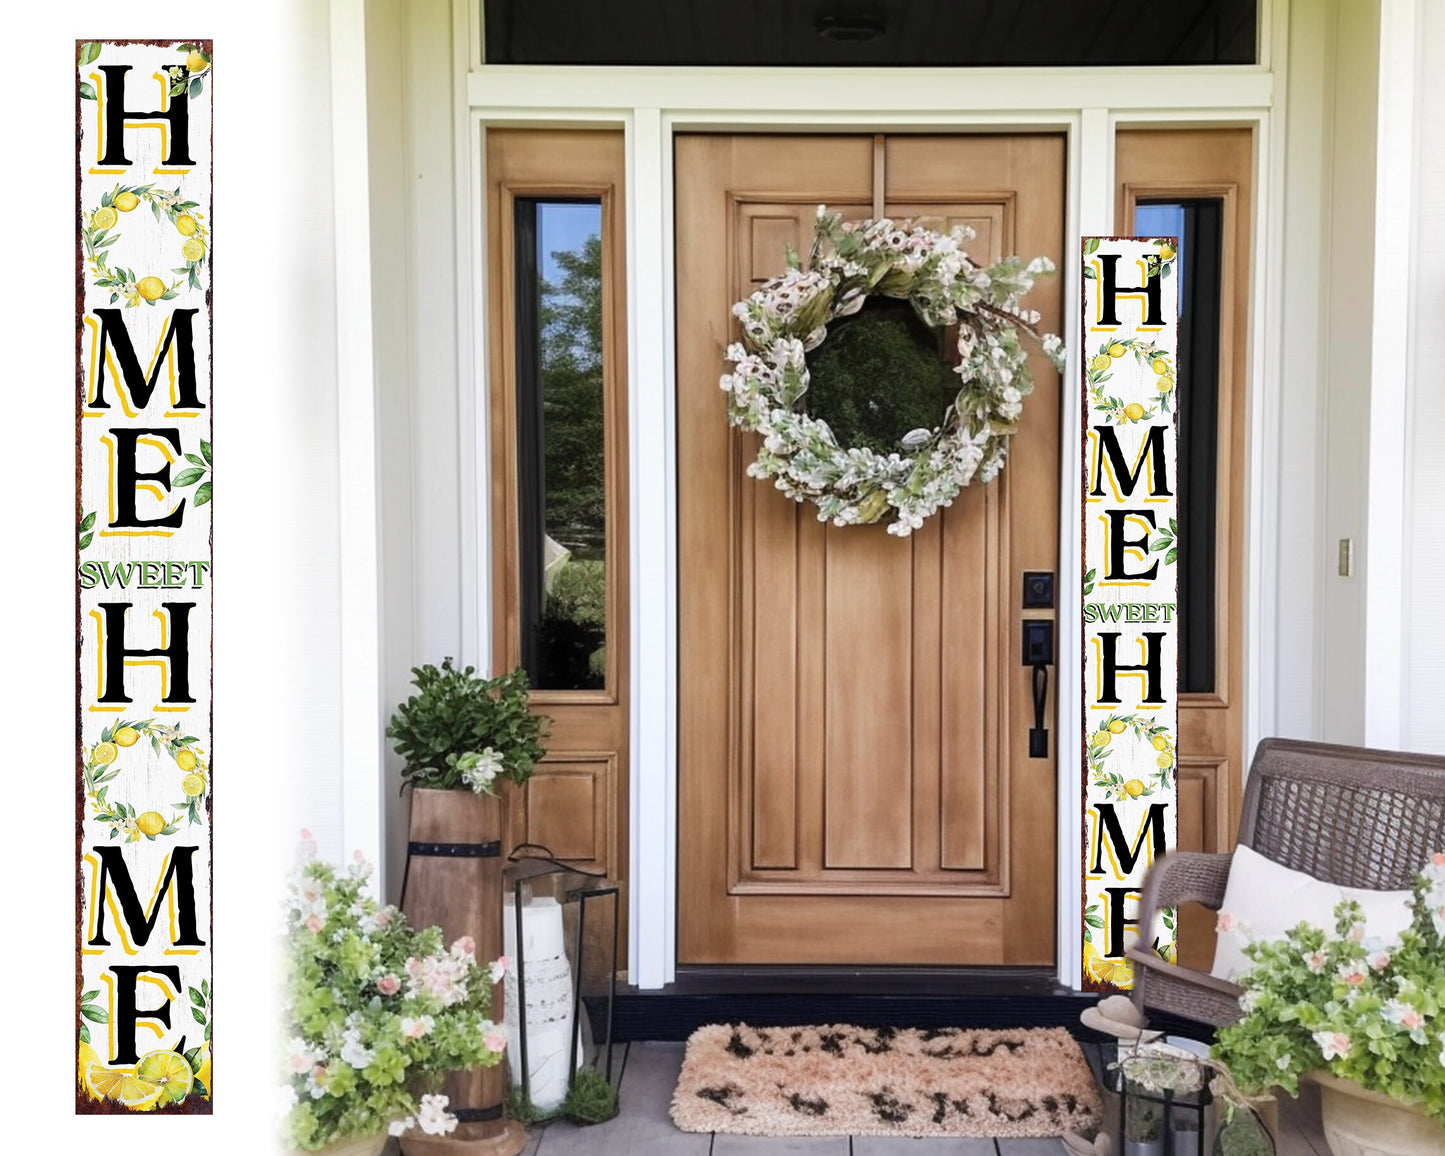 72in Lemon Summer Home Sweet Home Porch Sign | Rustic Wooden Front Door Decor | Outdoor Farmhouse Patio Display Board